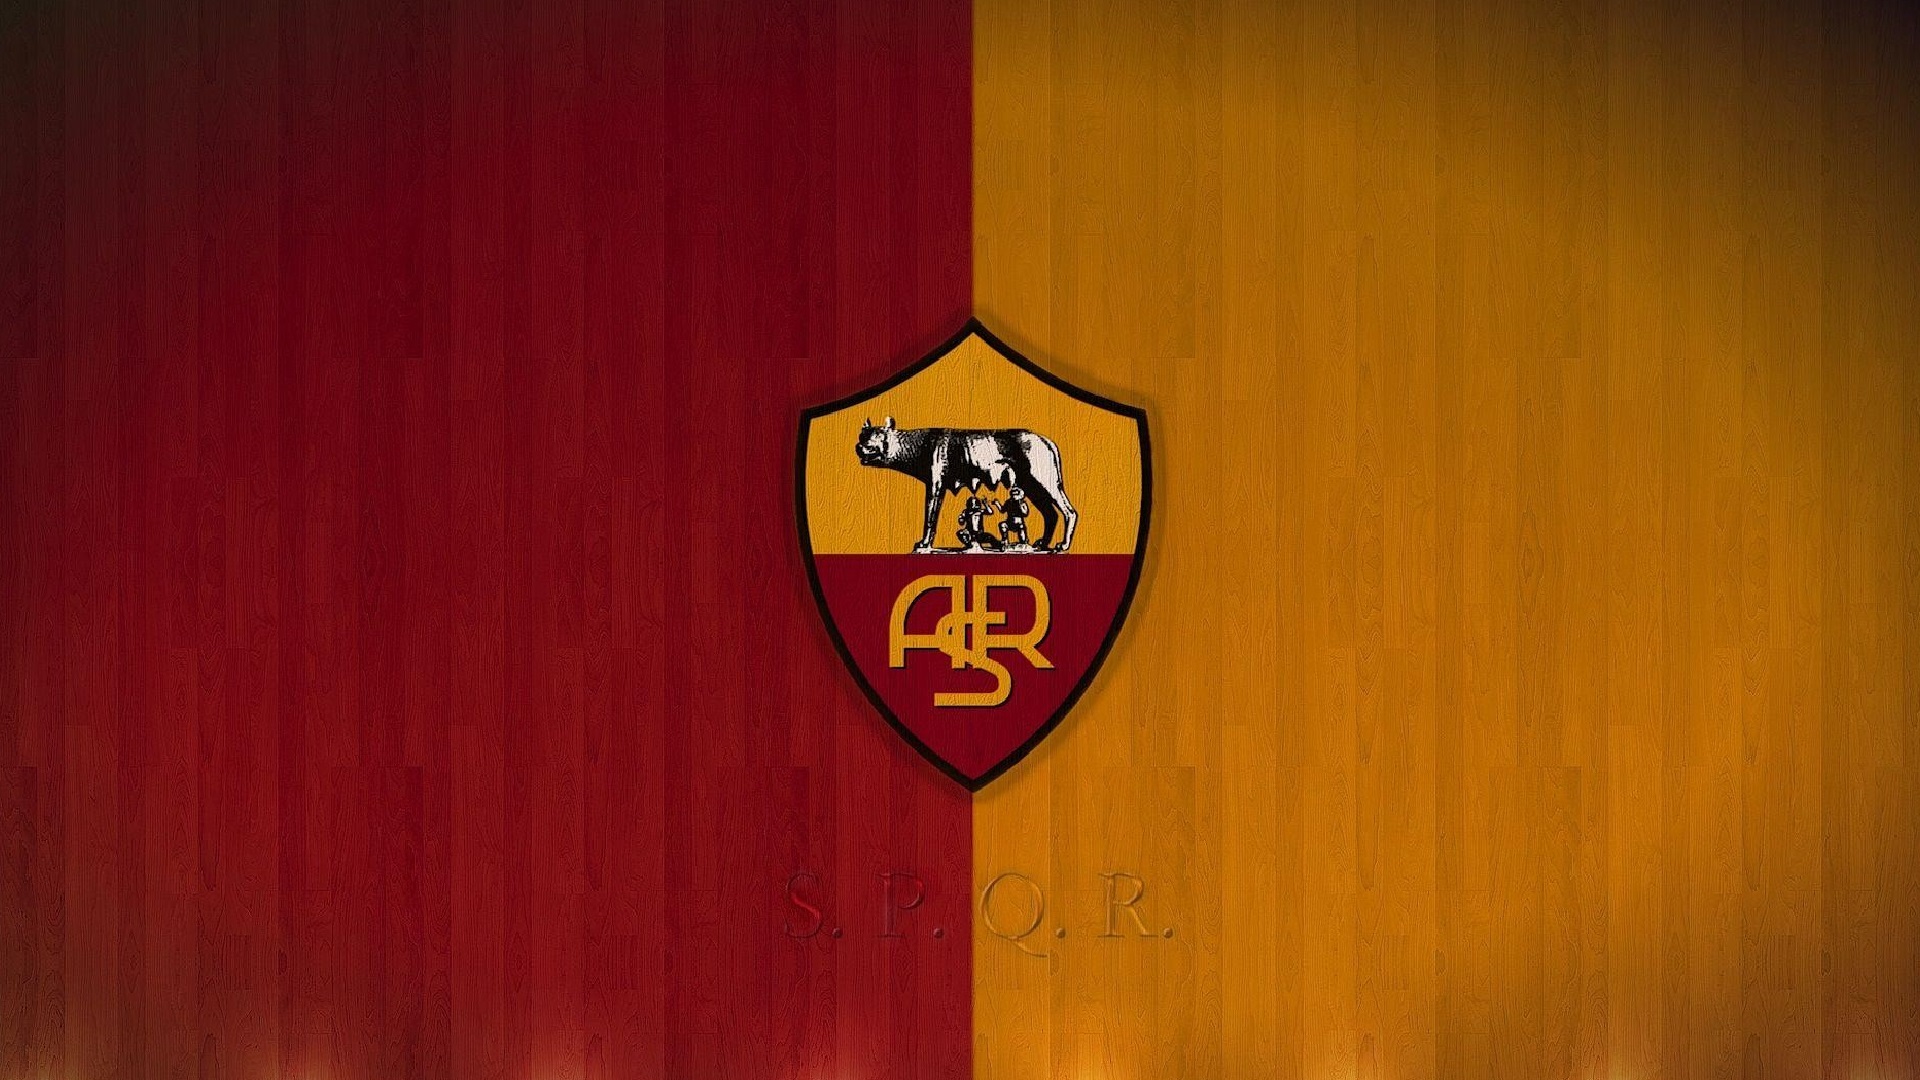 AS Roma Wallpaper HD With high-resolution 1920X1080 pixel. You can use this wallpaper for your Desktop Computers, Mac Screensavers, Windows Backgrounds, iPhone Wallpapers, Tablet or Android Lock screen and another Mobile device